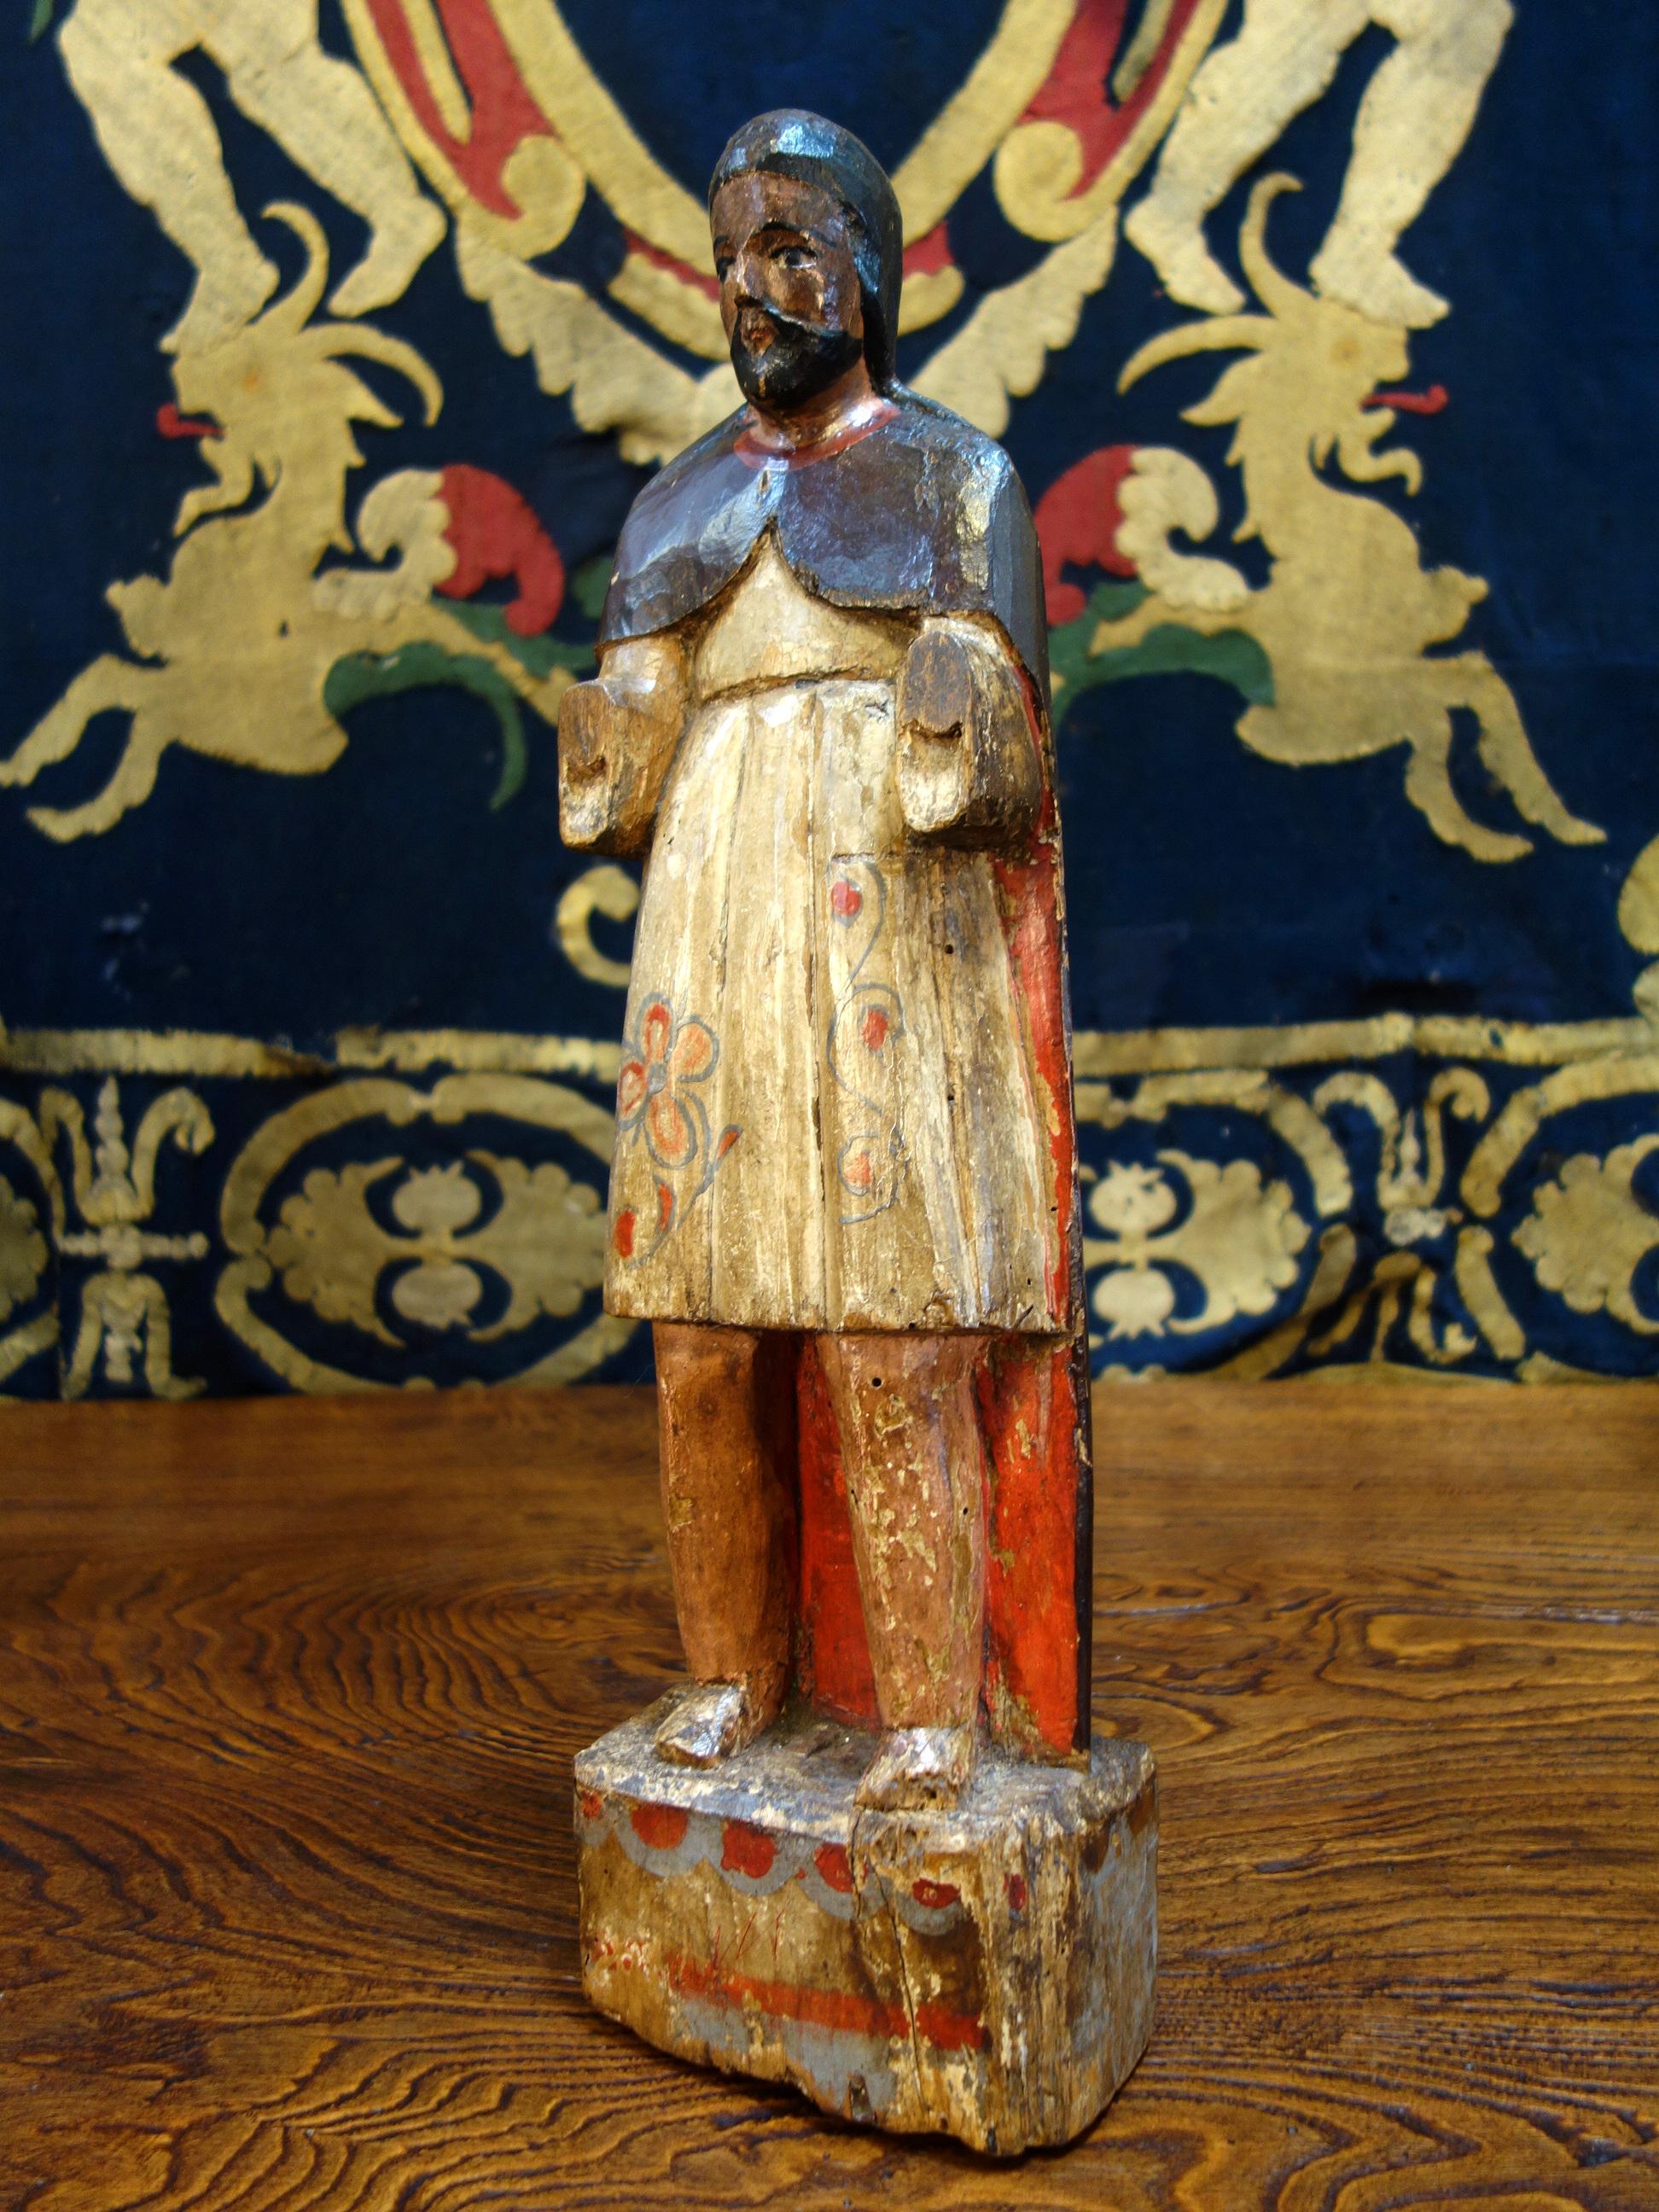 19th century Italian hand carved and painted primitive male Santos wood sculpture, circa 1840.

Measures: 22.2” H x 6.3” W x 4” D.